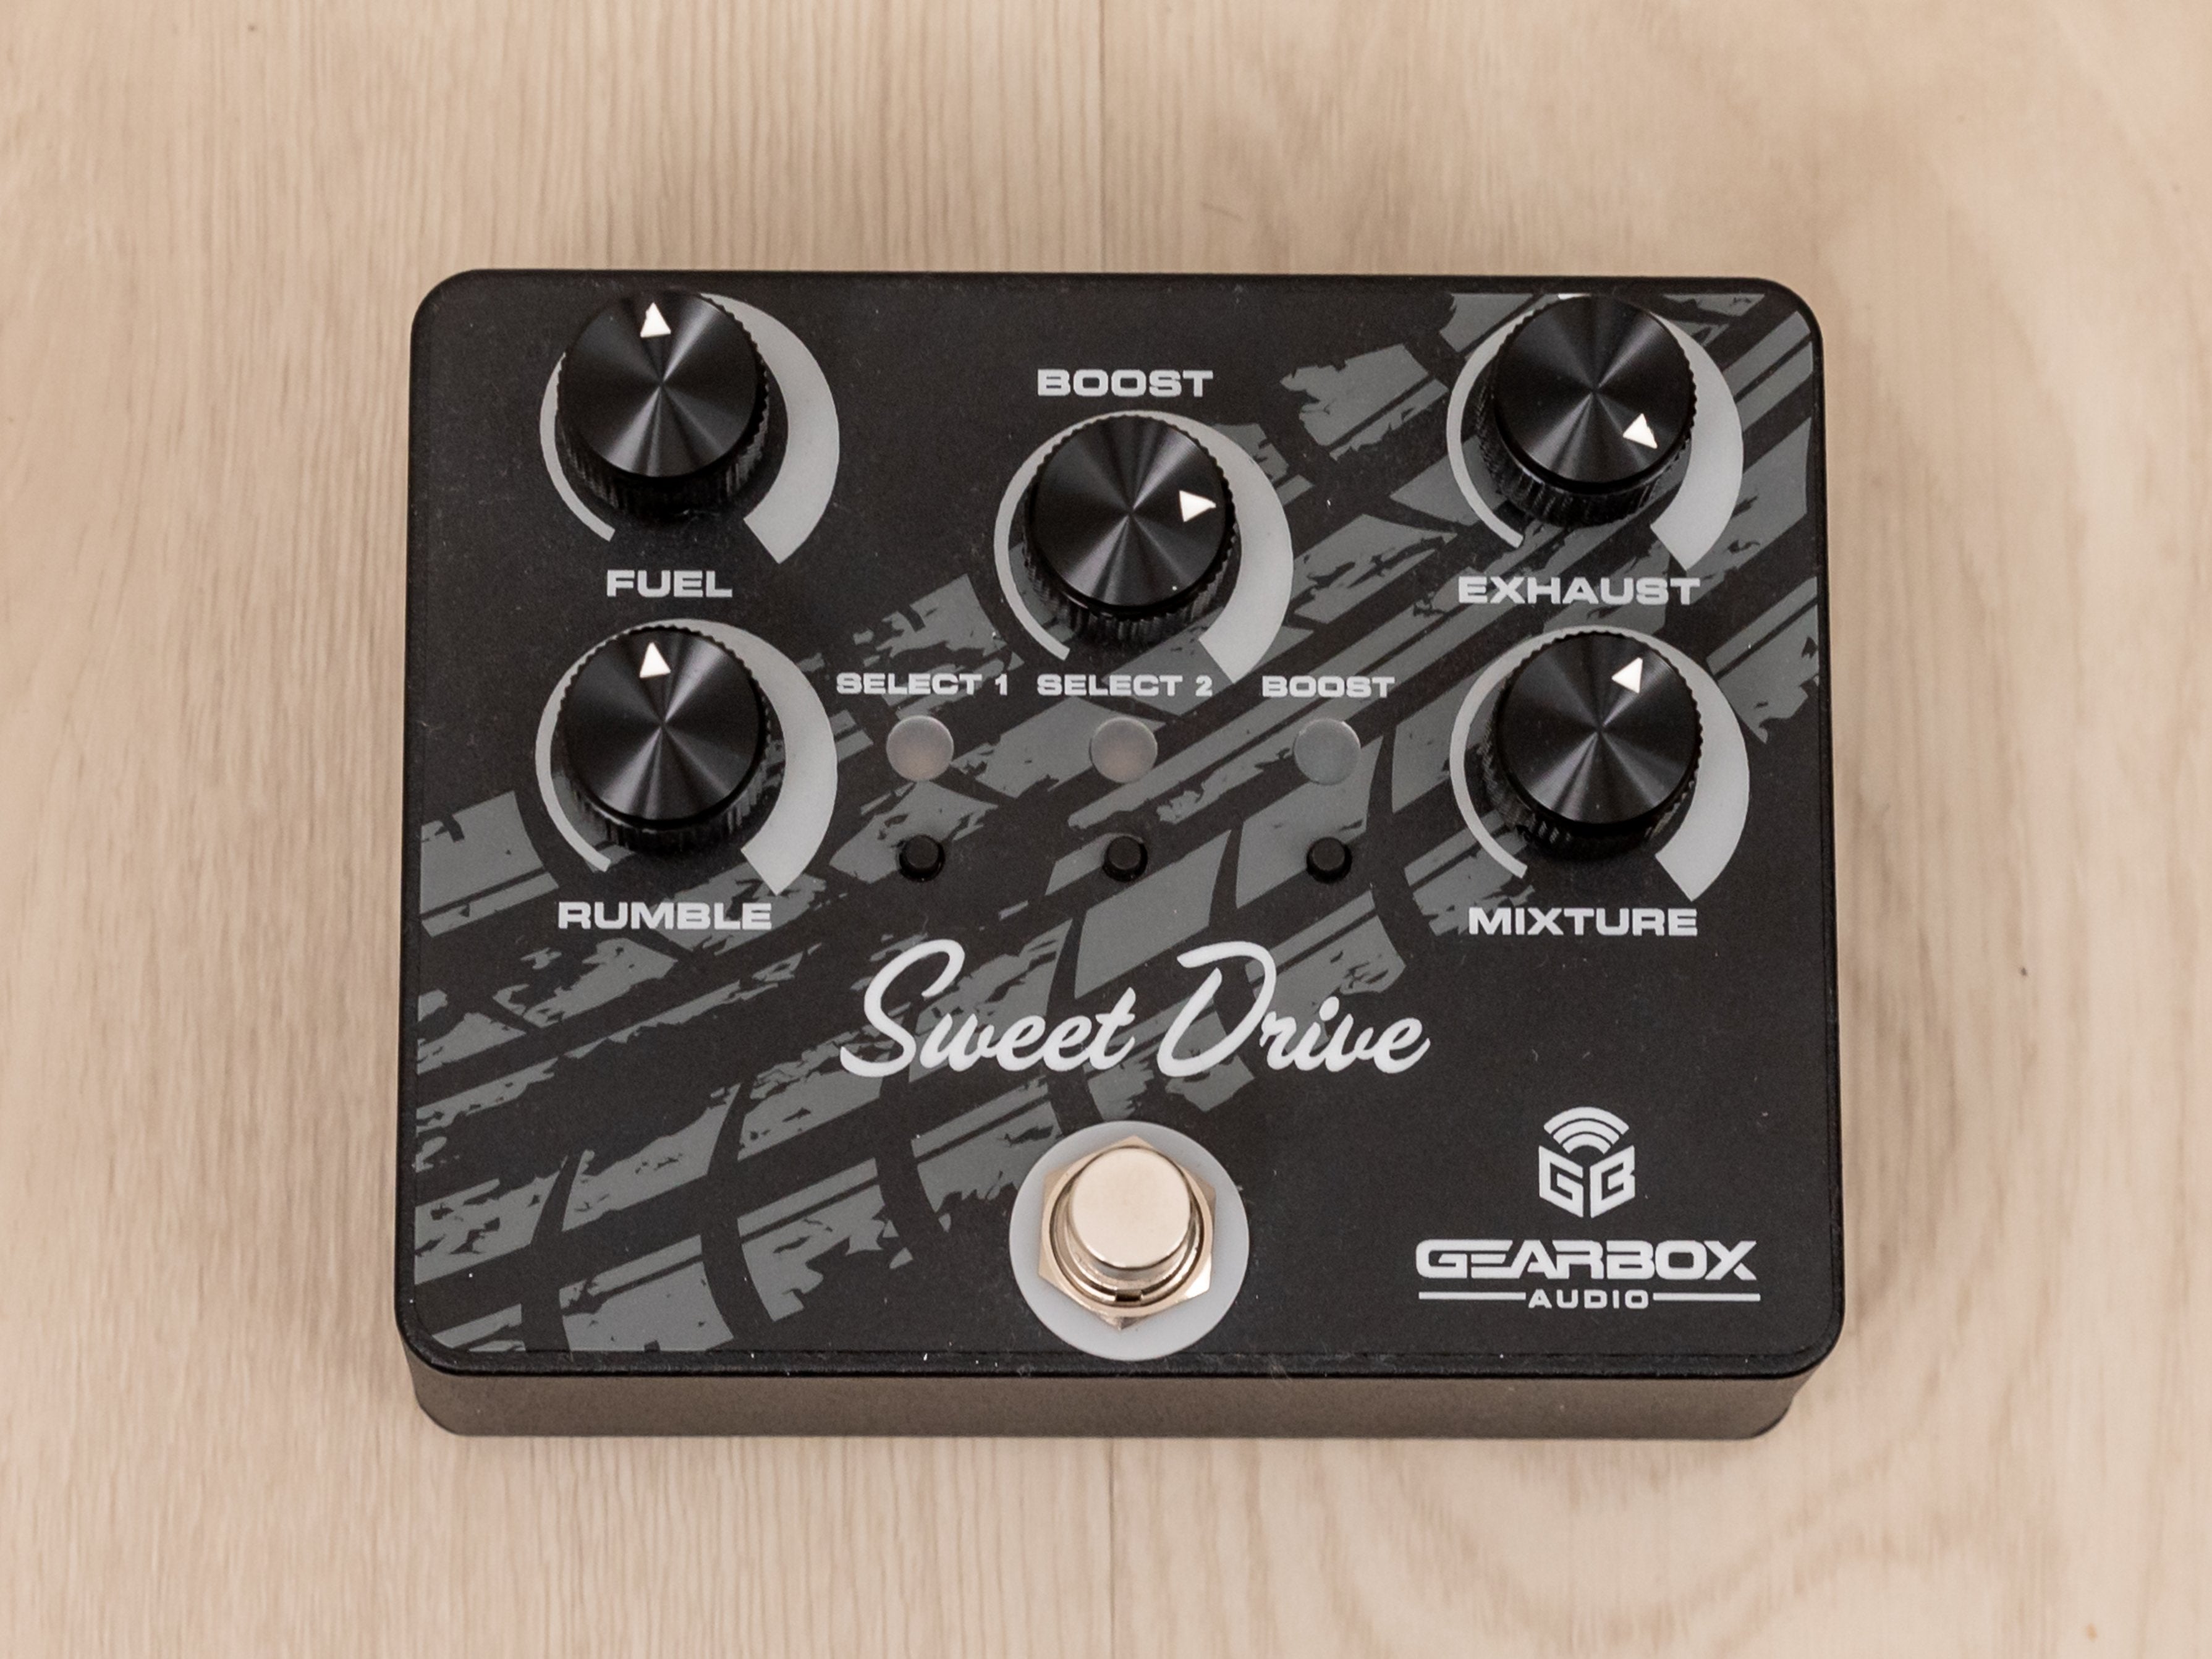 Gearbox Audio Sweet Drive Multi-Stage Overdrive Guitar Effects Pedal w/ Box